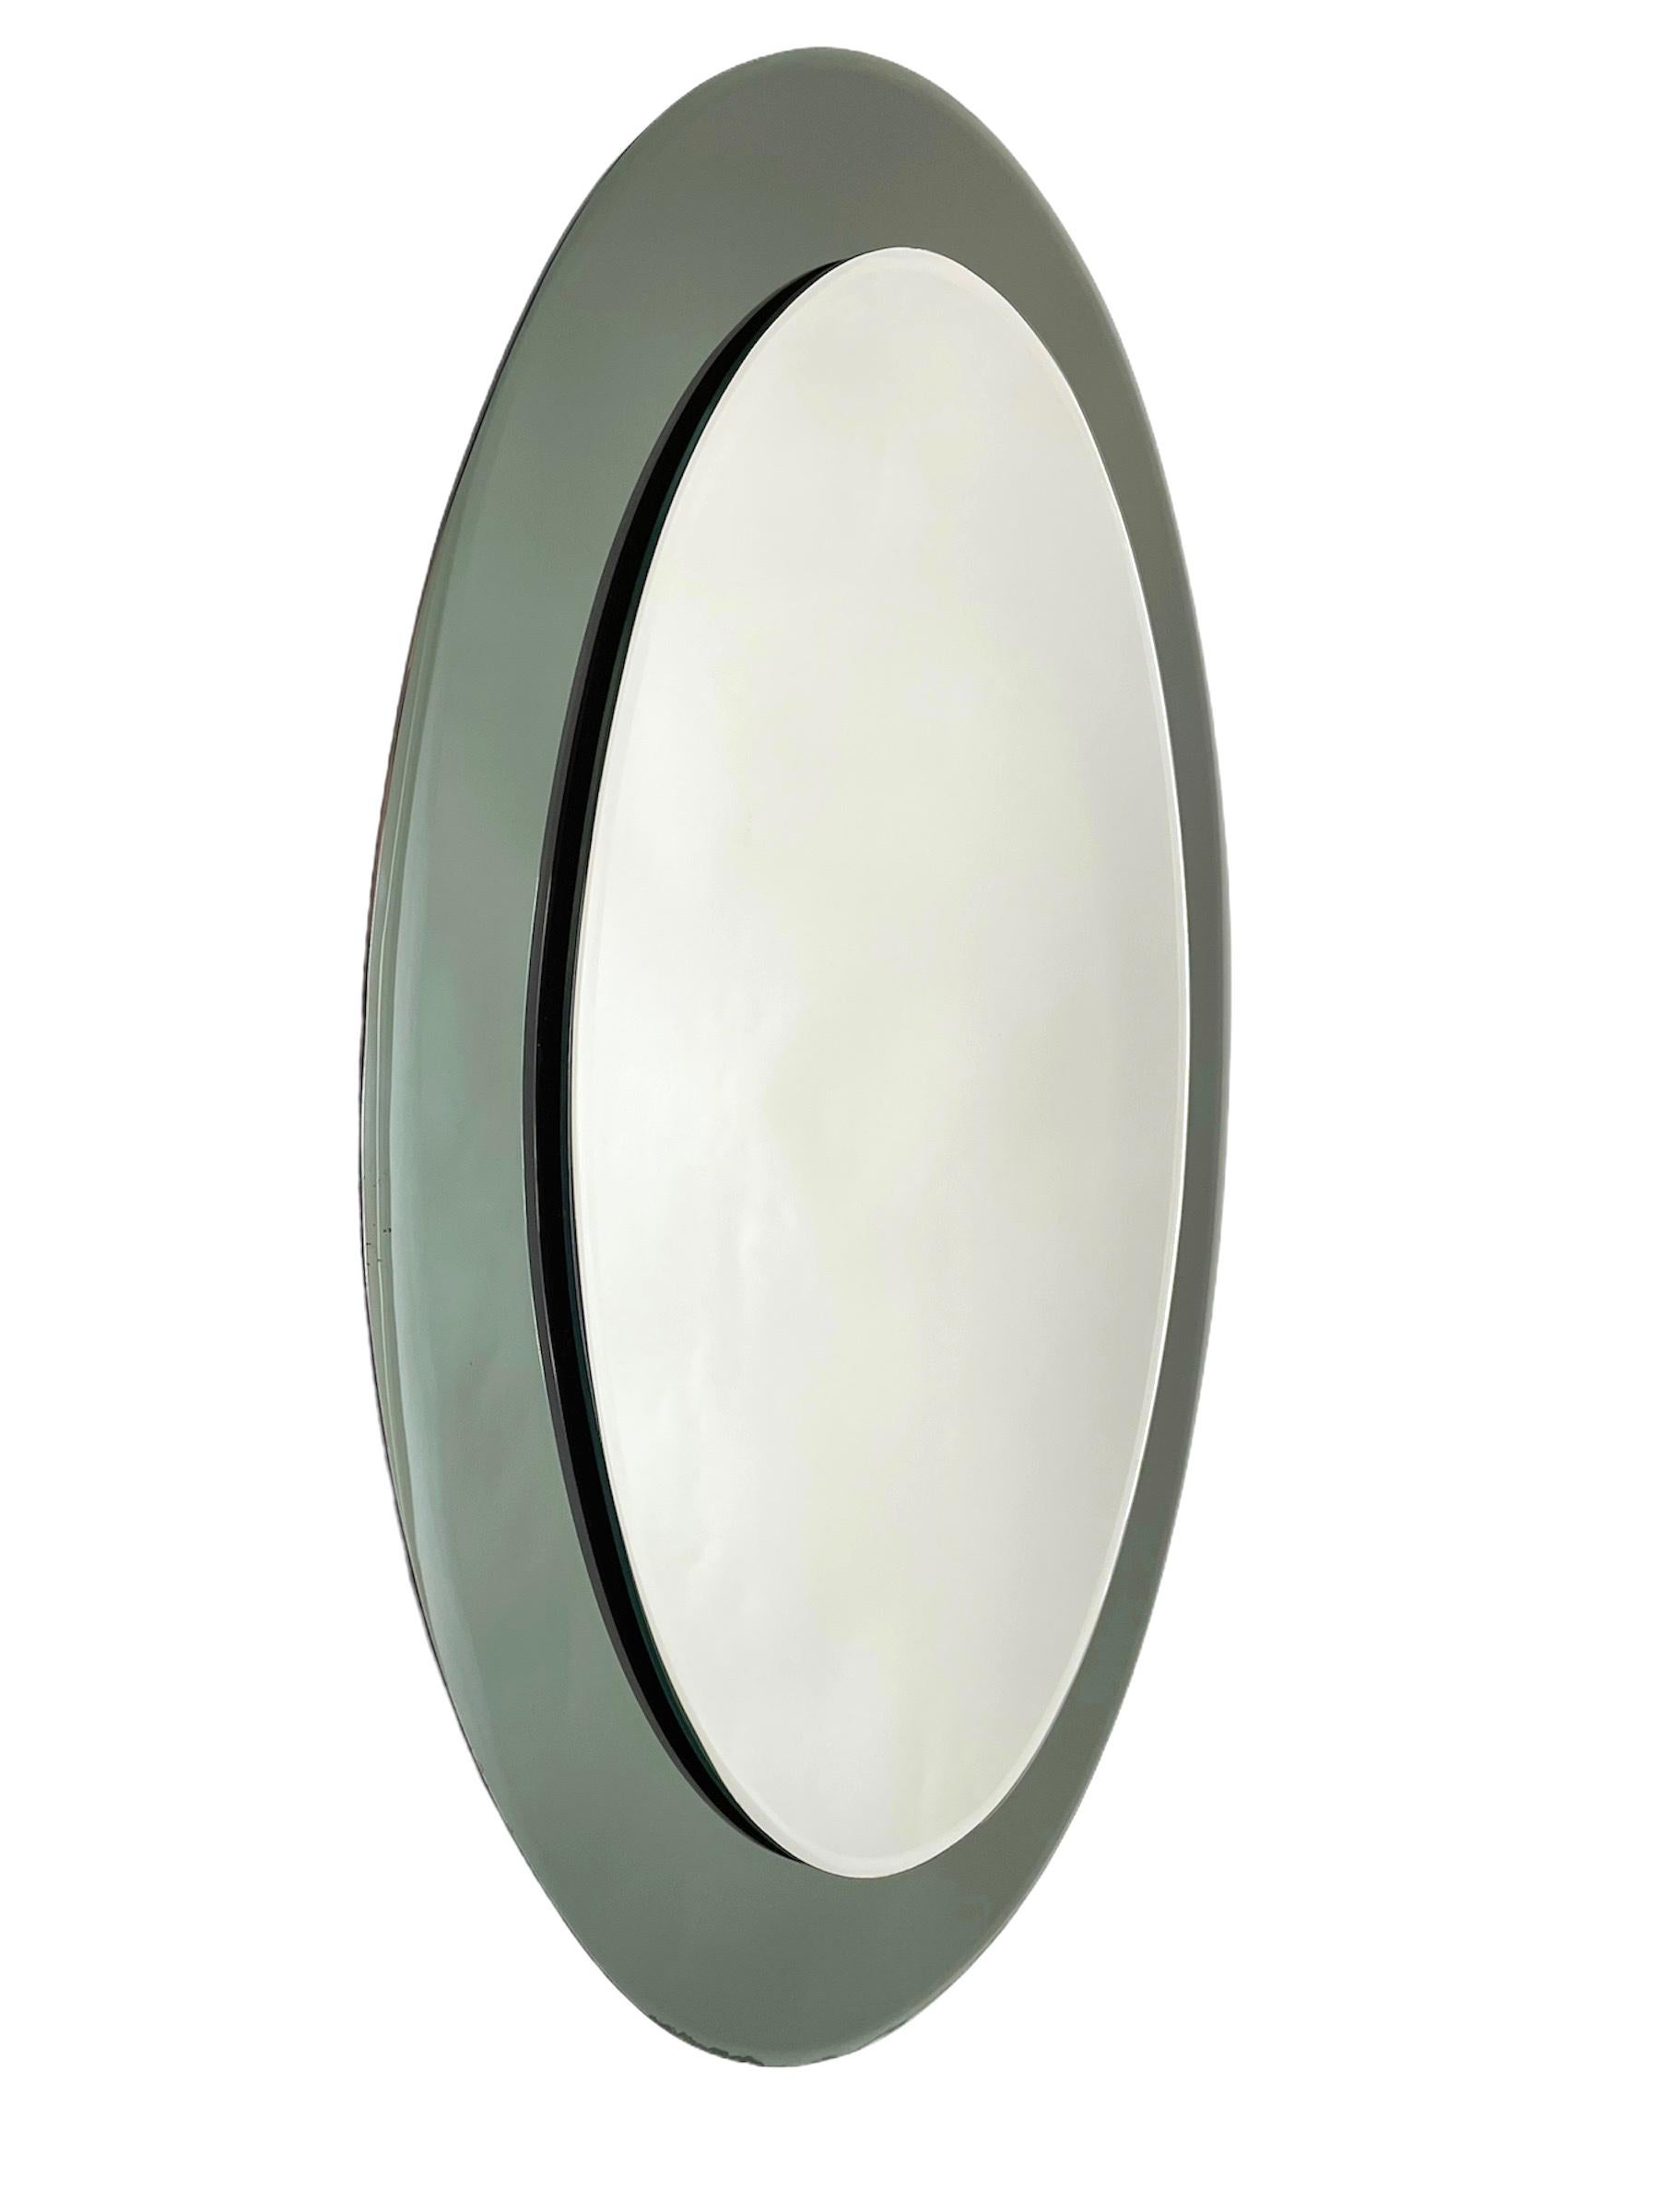 Midcentury Glass Framed Oval Wall Mirror Attributed to Cristal Art, Italy, 1960s 1